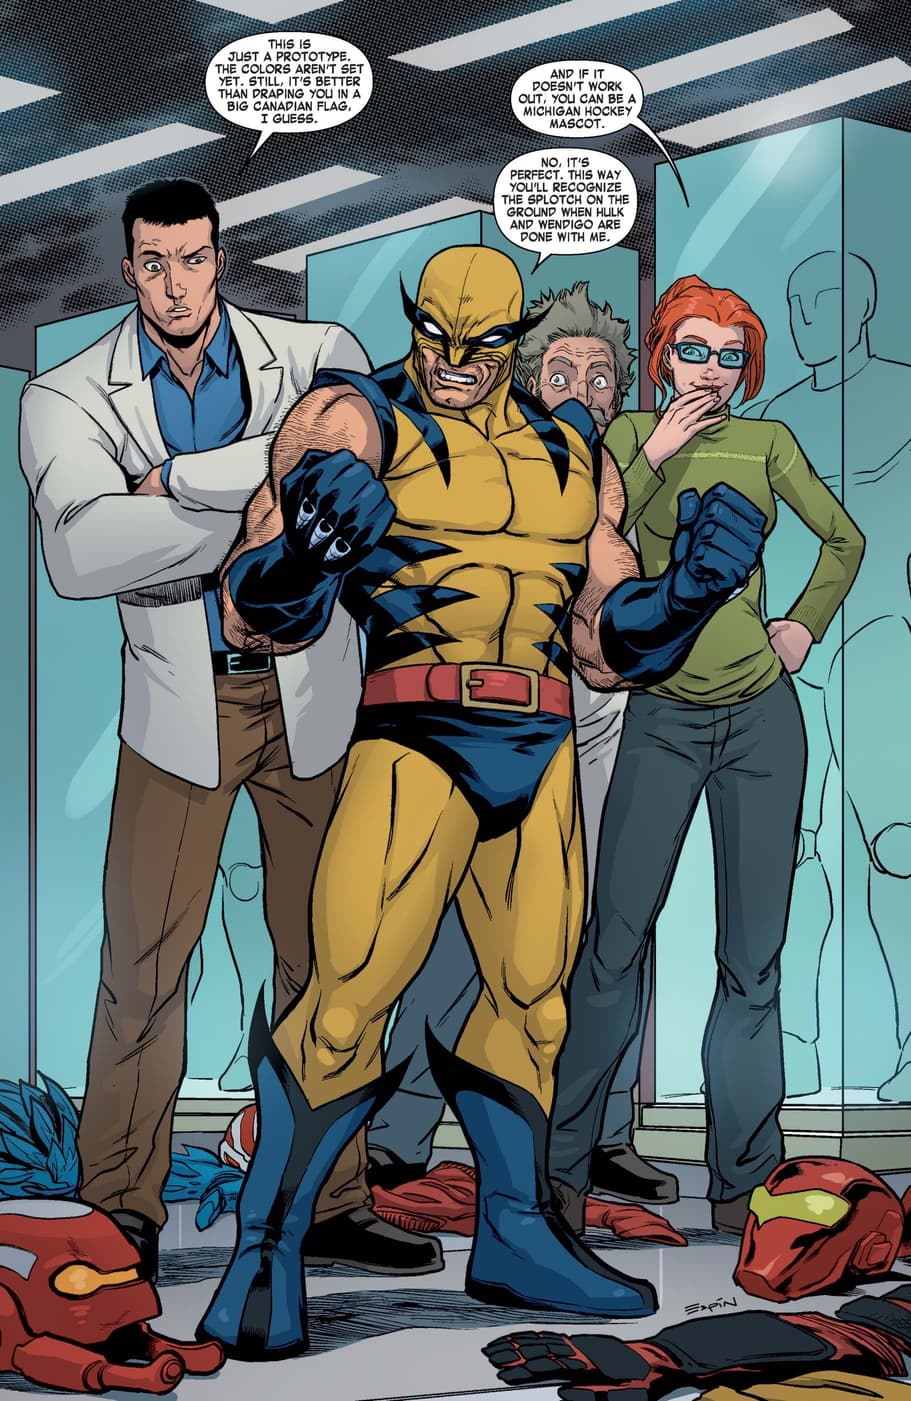 Wolverine tries on his iconic costume for the first time in WOLVERINE: SEASON ONE (2013).